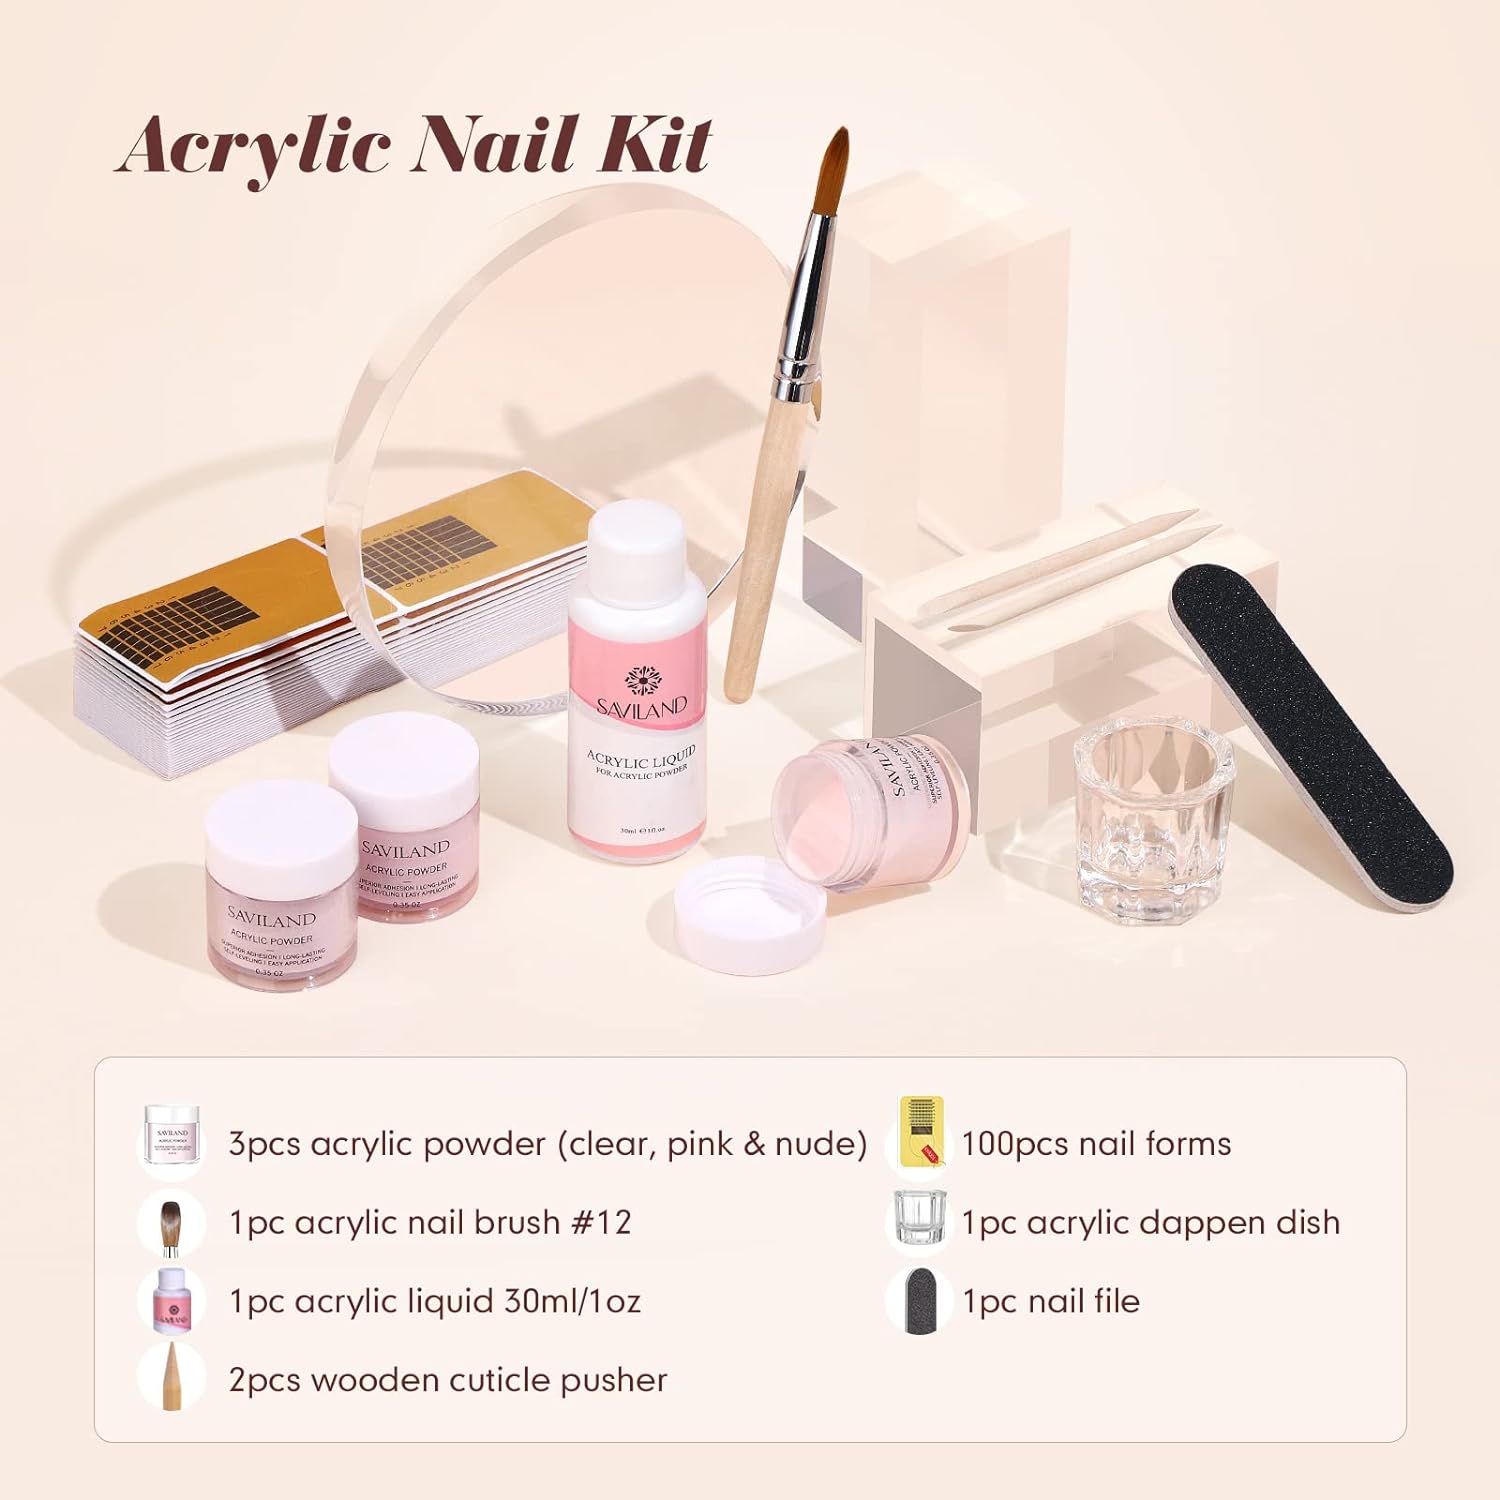 Complete Acrylic Nail Kit For Beginners - Clear Pink Nude Acrylic Powder,  Professional Nails Kit Acrylic Set Manicure Tools Acrylic Supplies Gift For